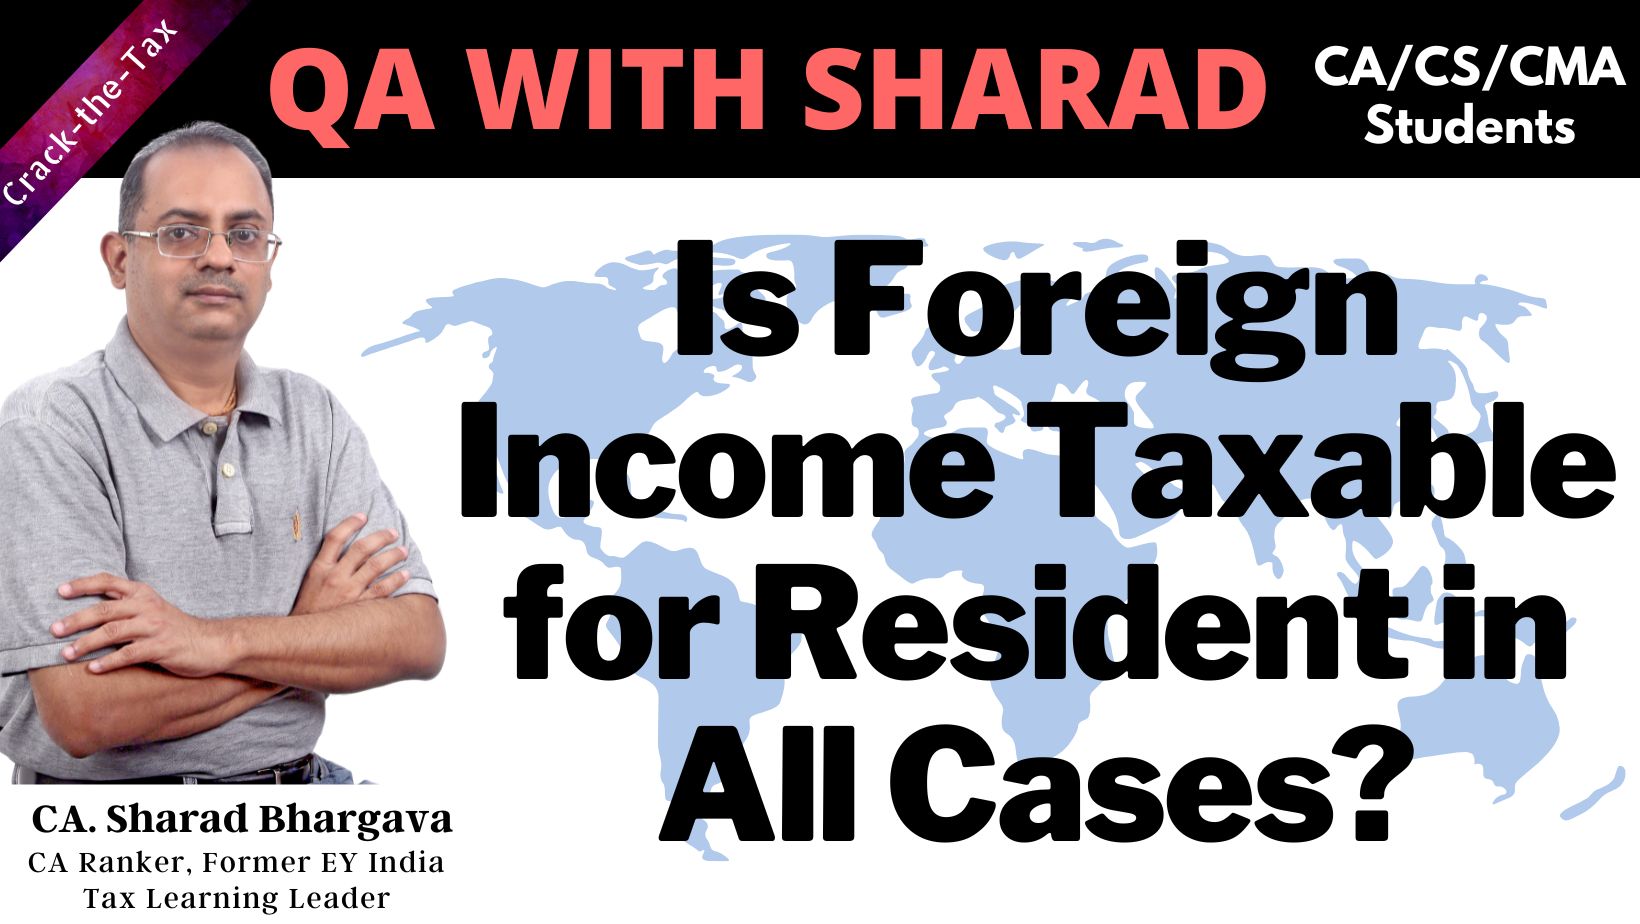 Is foreign income taxable for Resident in ALL cases? // By CA. Sharad Bhargava